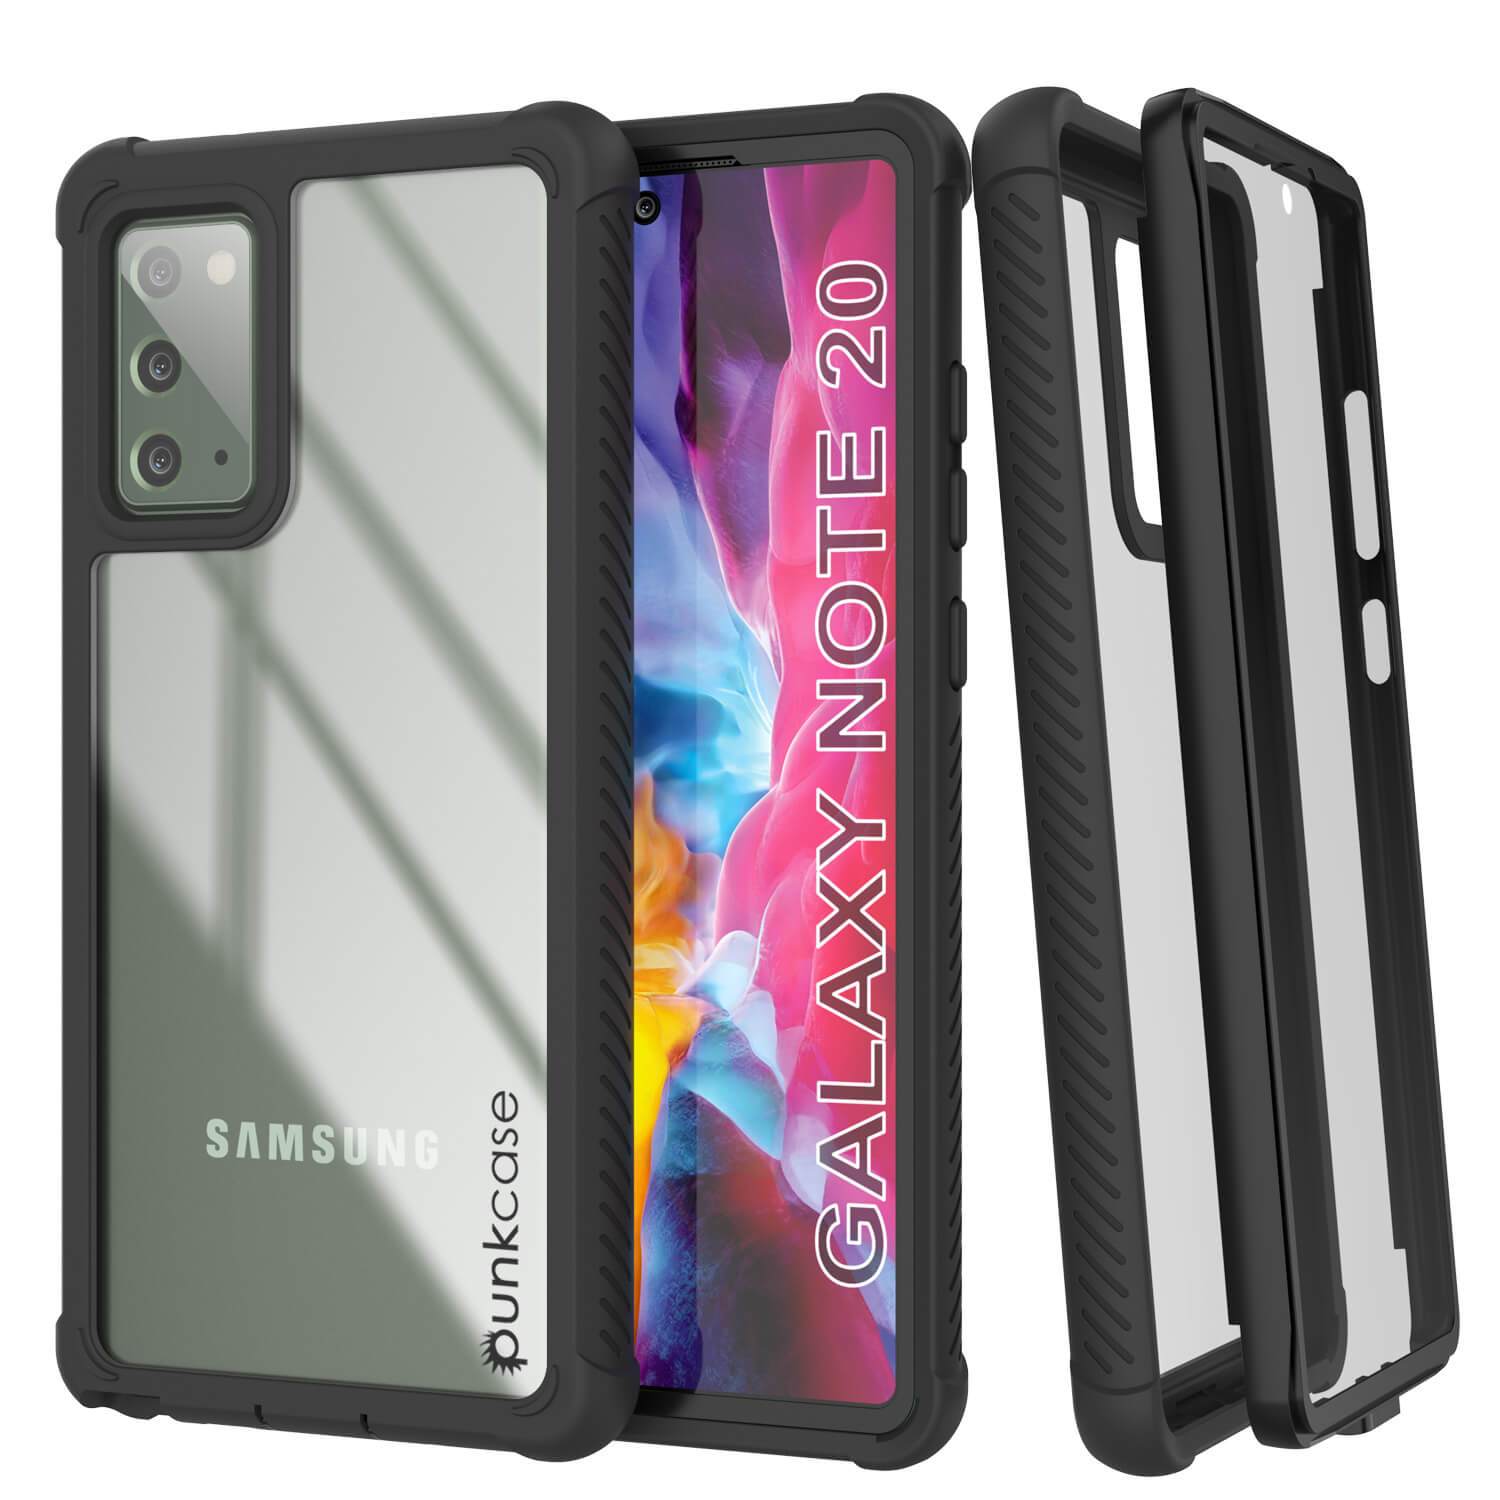 Punkcase Galaxy Note 20 Case, [Spartan Series] Black Rugged Heavy Duty Cover W/Built in Screen Protector